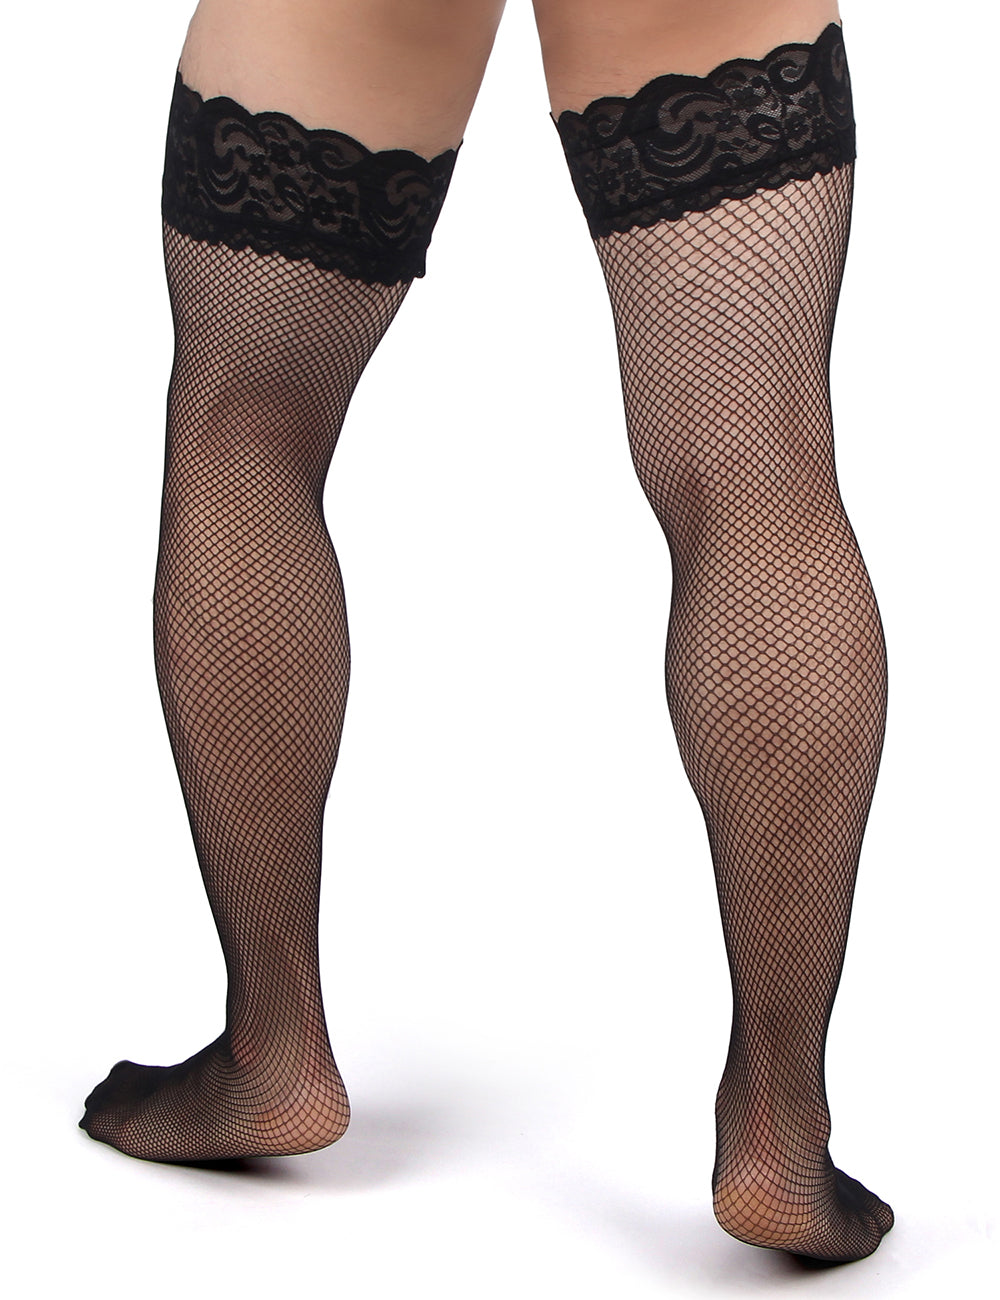 JCSTK - Unisex Fishnet Lace Top Stockings, Strong for Our Males to Wear! Black